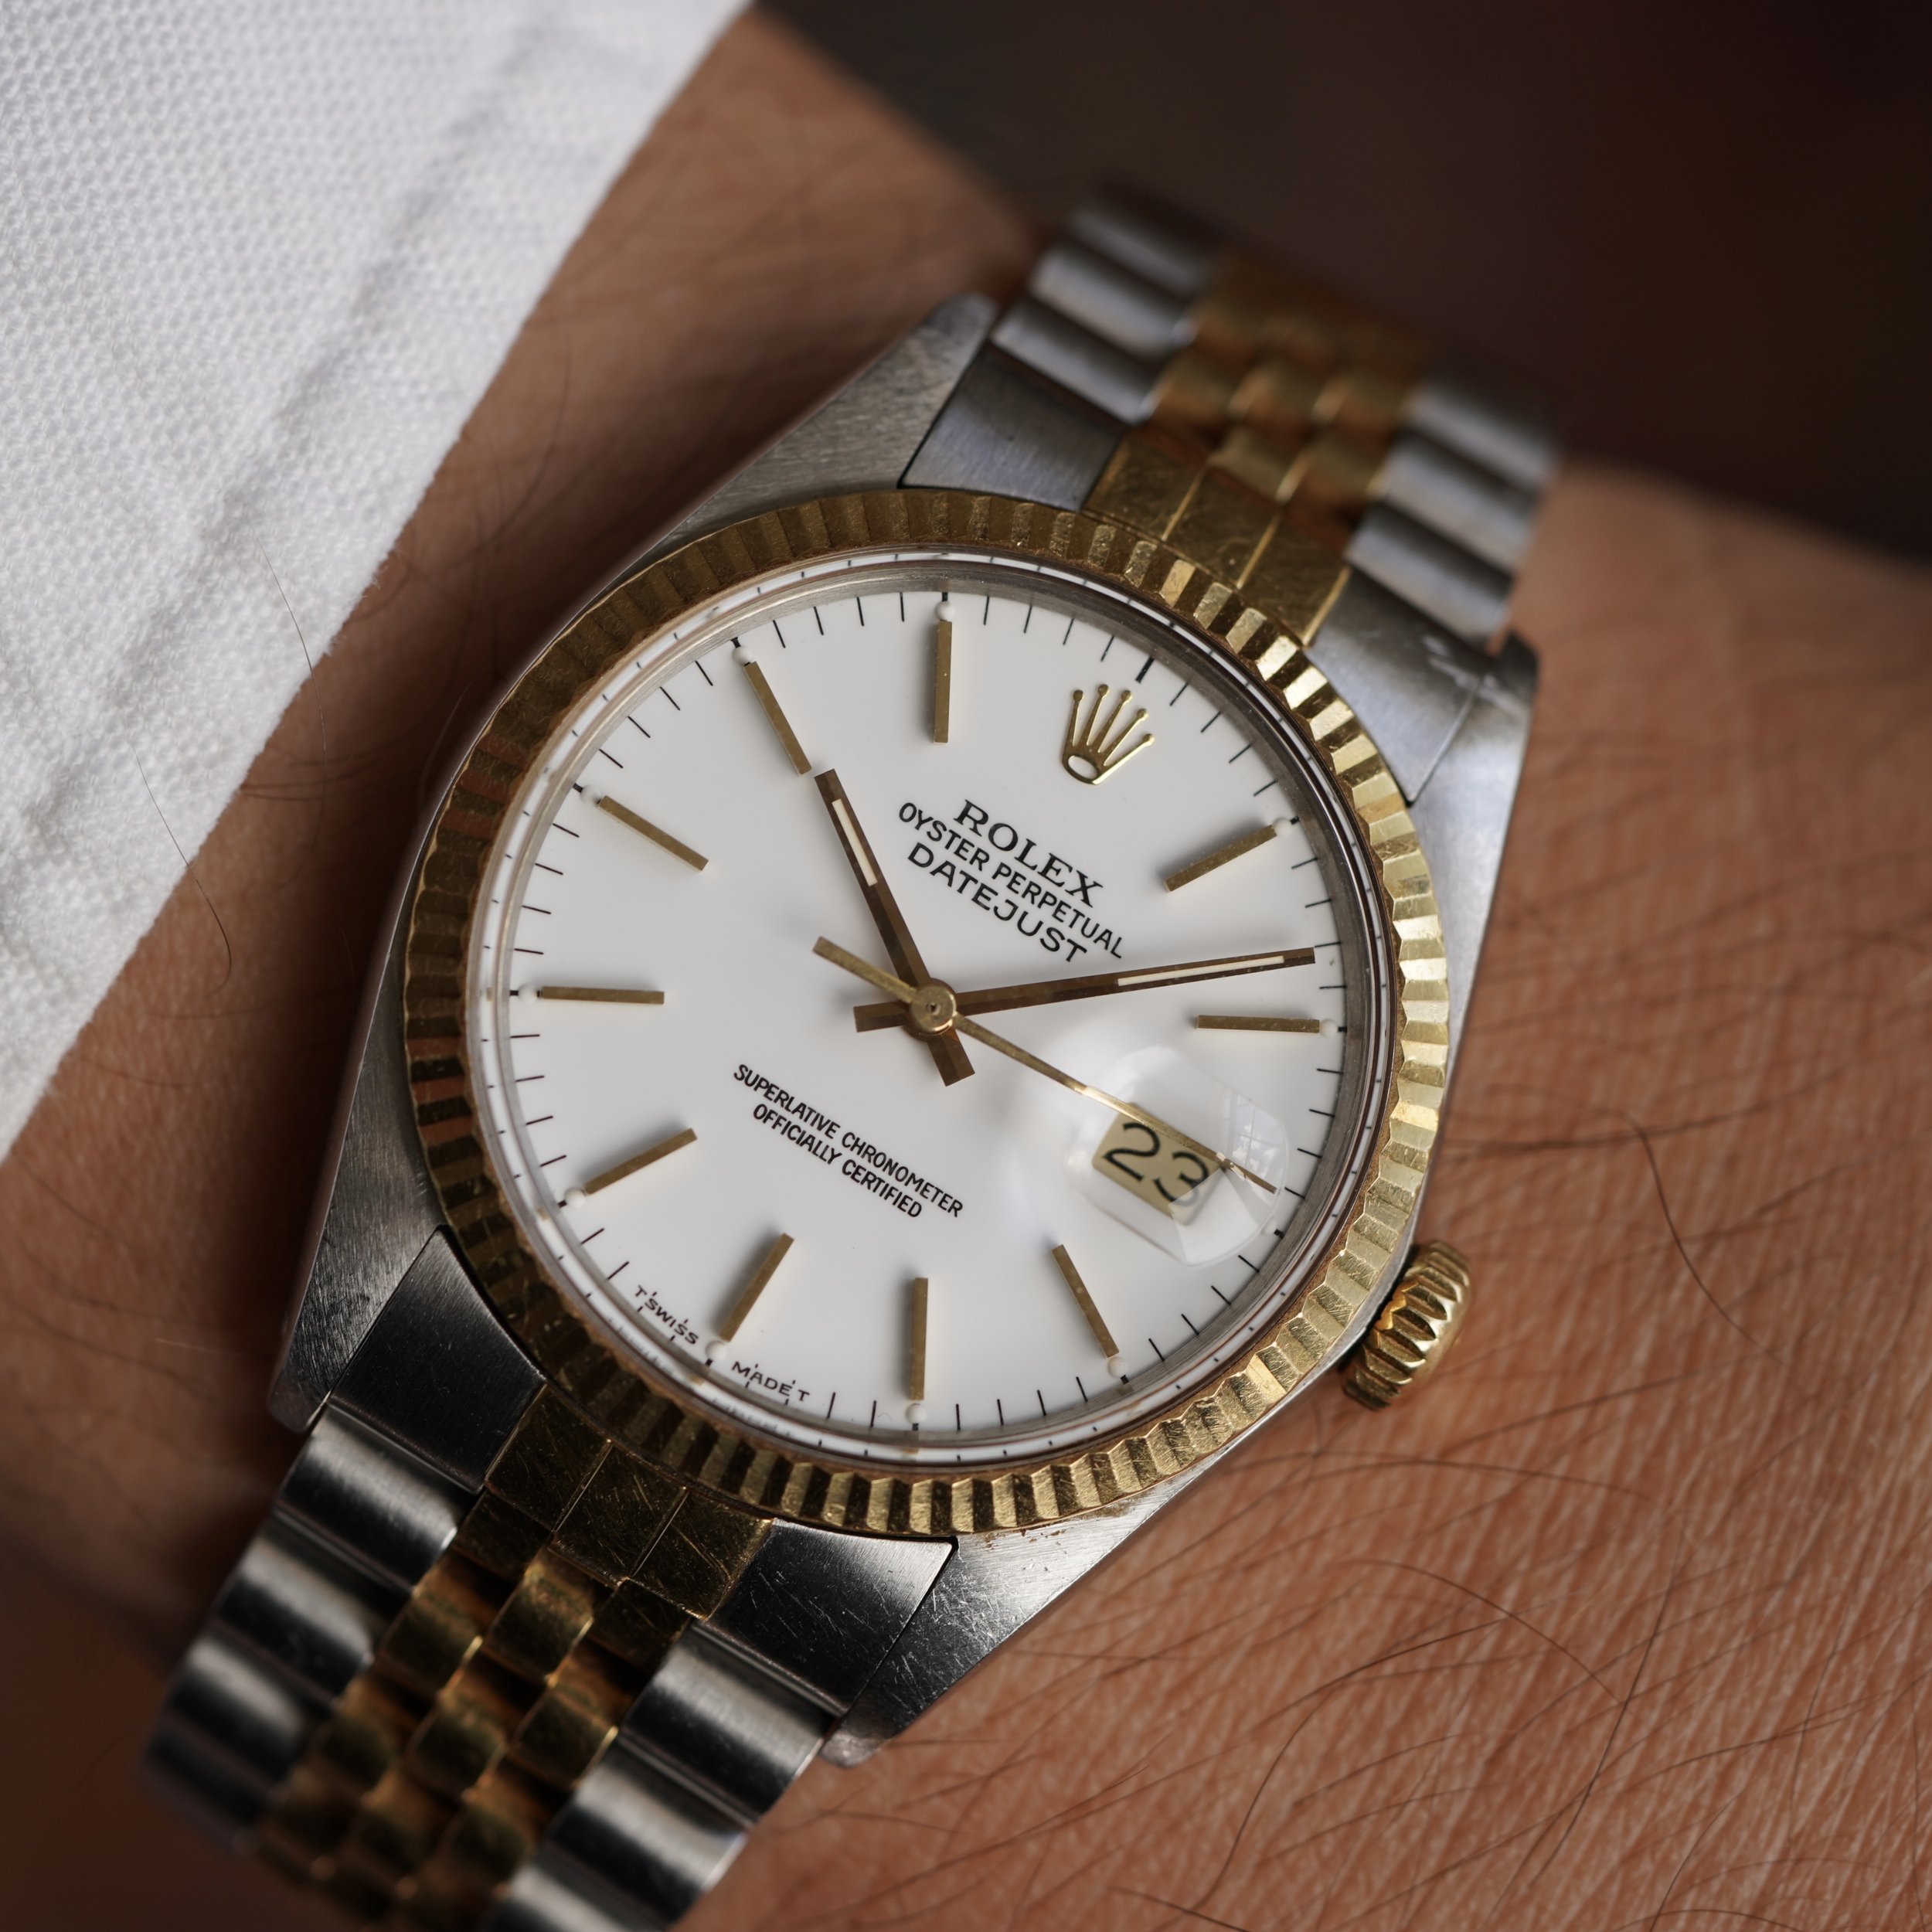 Rolex Two-Tone Datejust Reference 16013 Unpolished — Wind Vintage